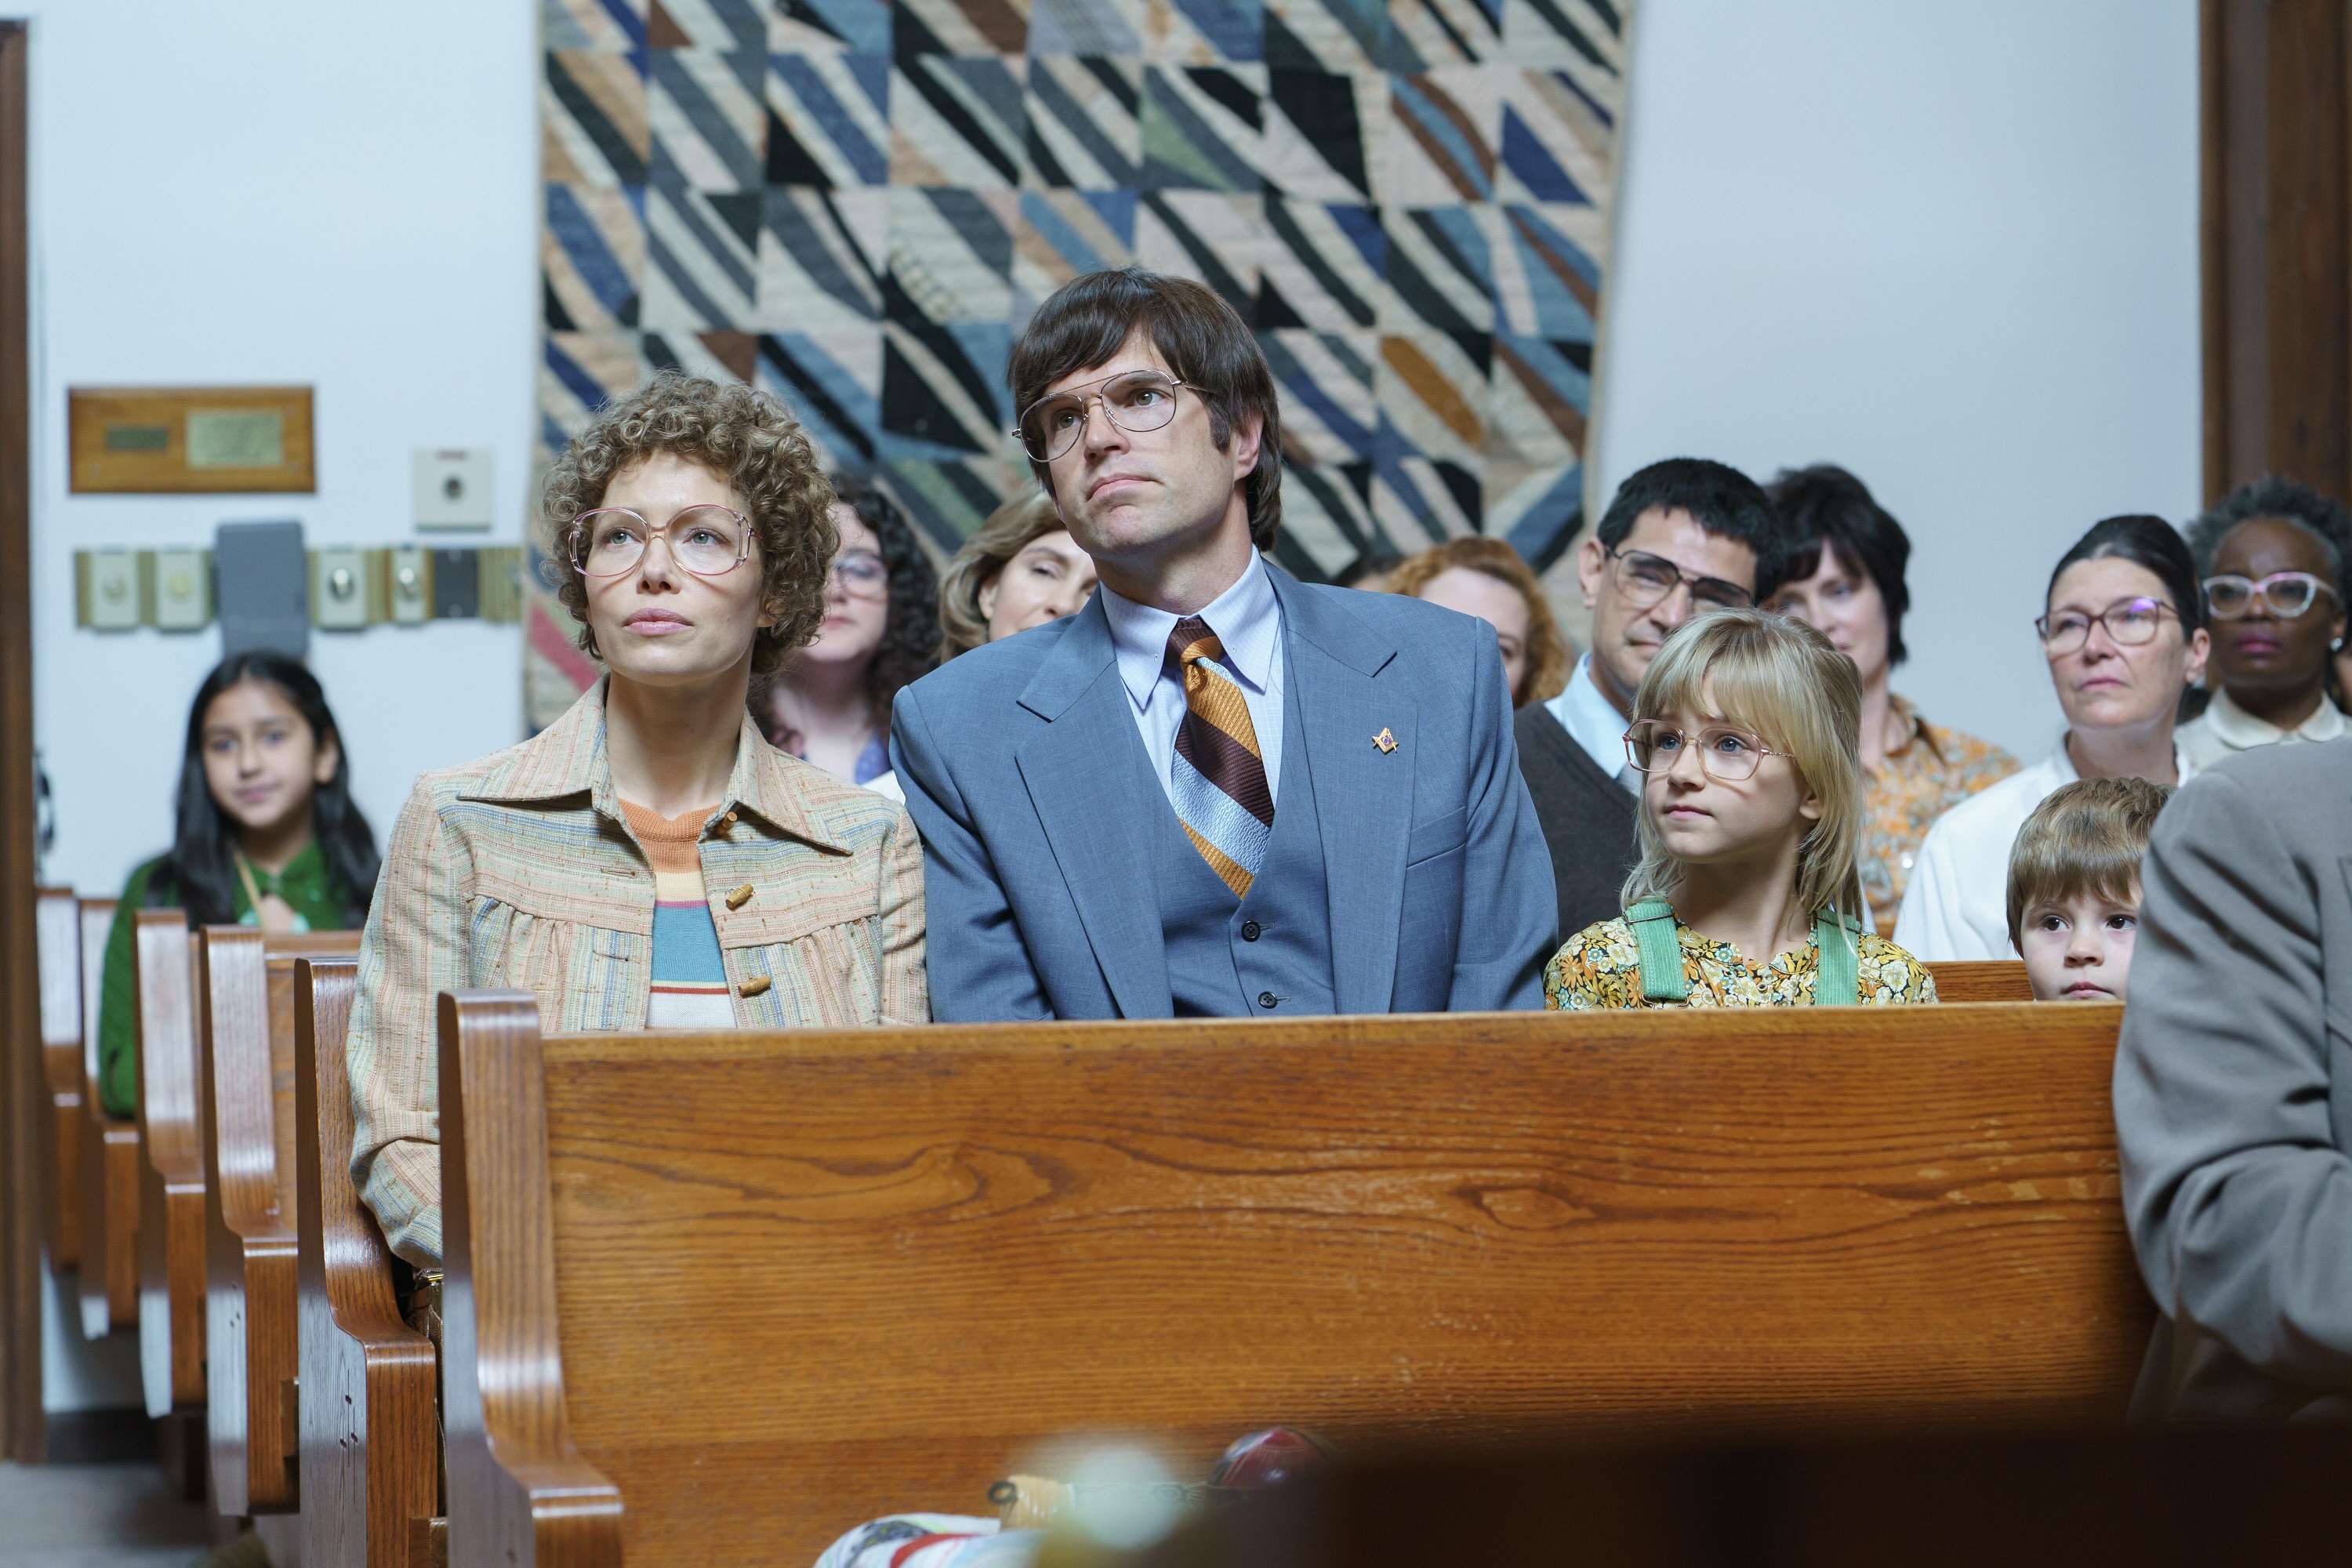 'Candy' on Hulu cast members Jessica Biel and Timothy Simons sitting together in a church pew as Candy and Pat Montgomery